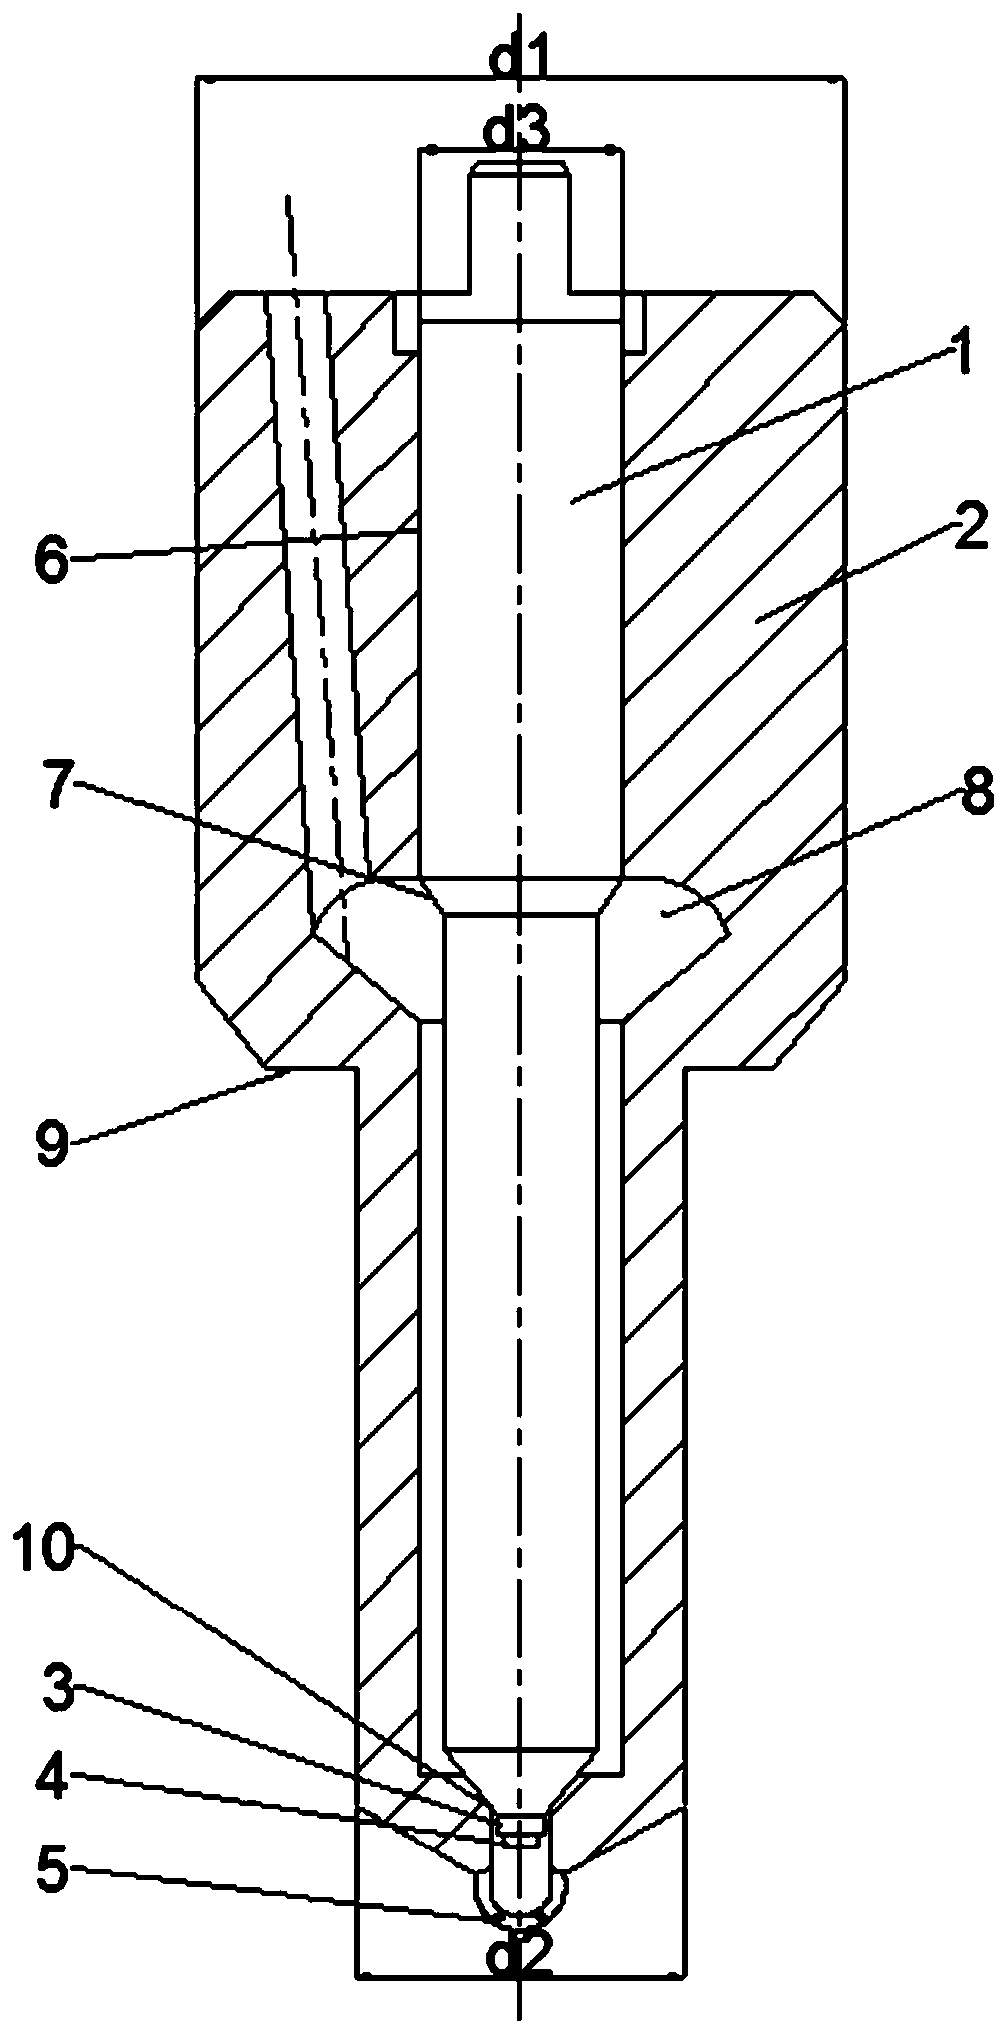 A hole-type fuel injector for controlling the injection stability of a commercial vehicle diesel engine with a small amount of fuel